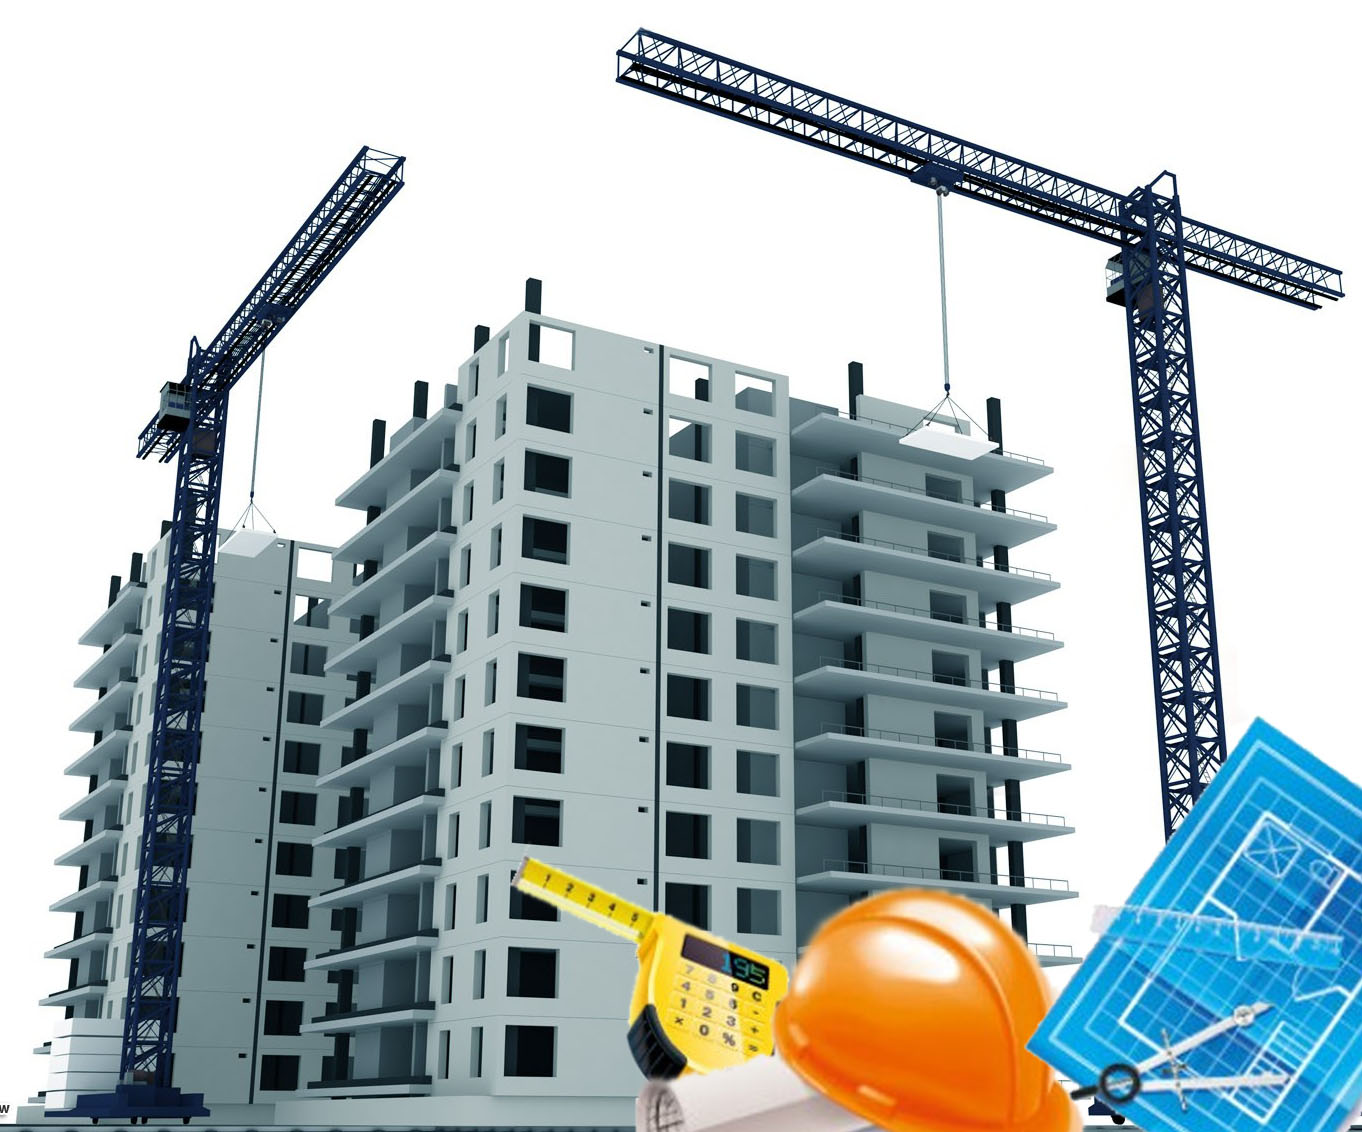 Overview of Construction and RealEstate Industries in Pakistan